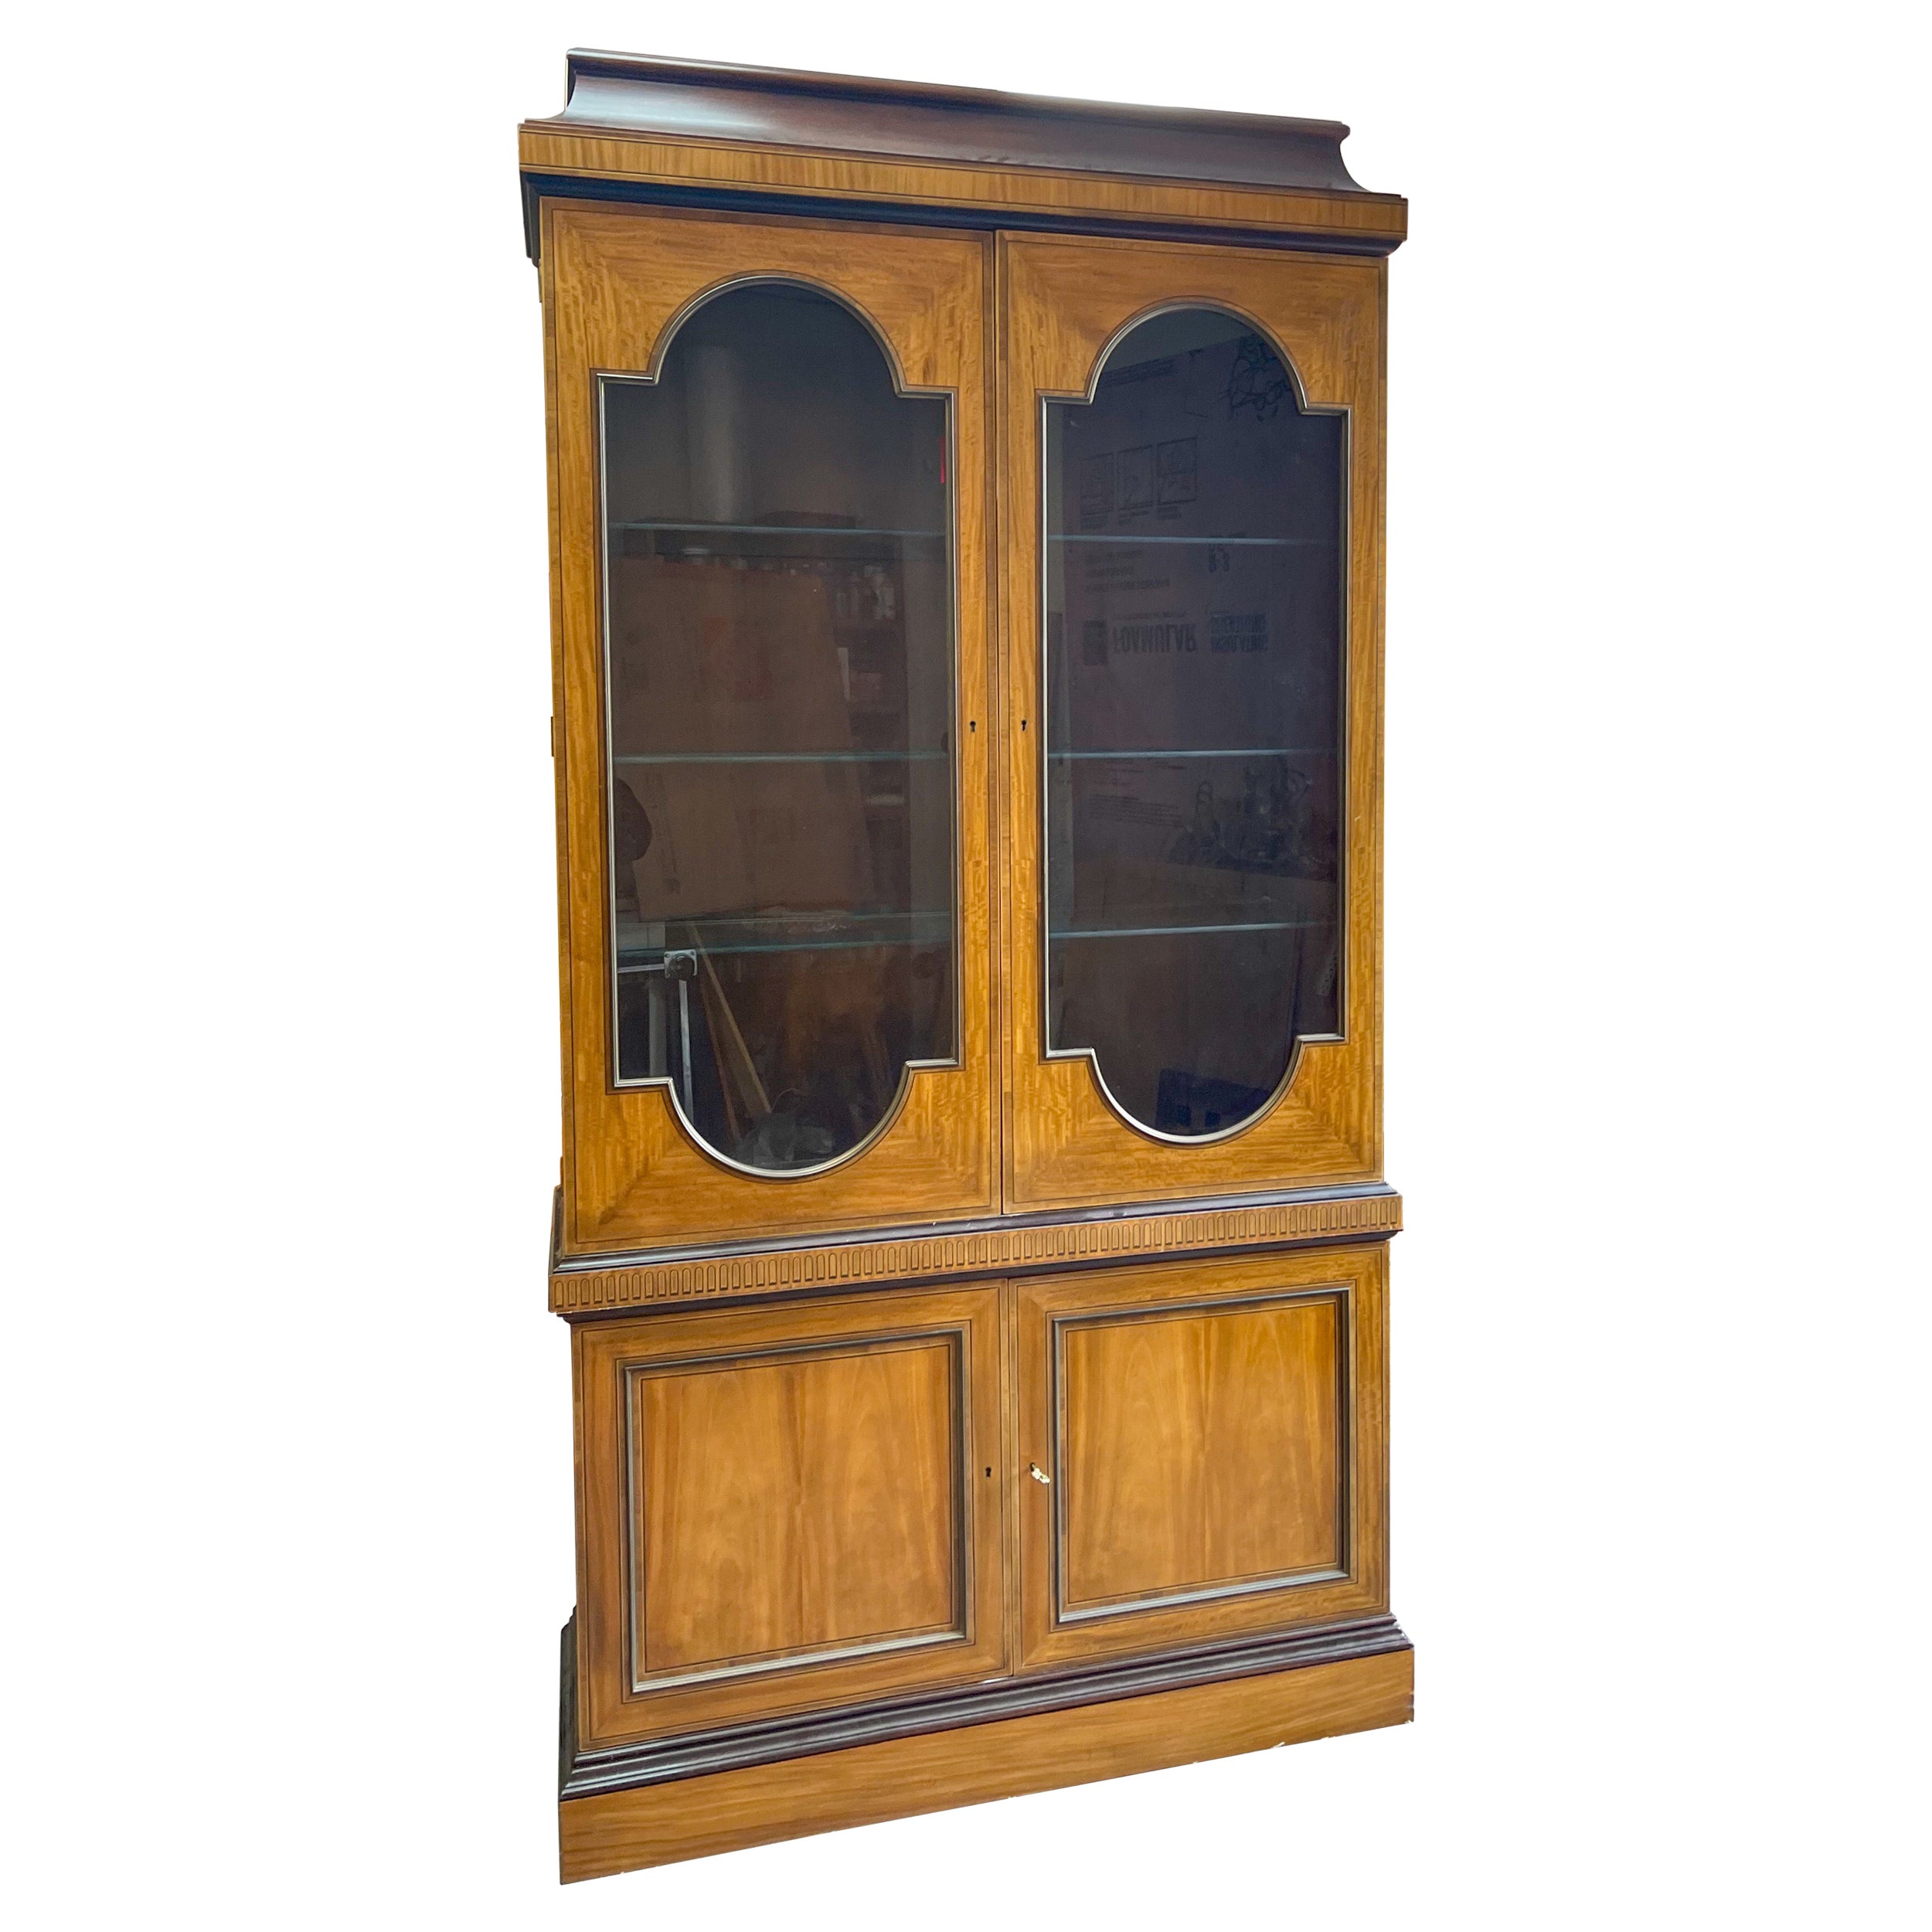 20th-C. Neo-Classical Satinwood Cabinet / Bookcase by Baker Furniture For Sale